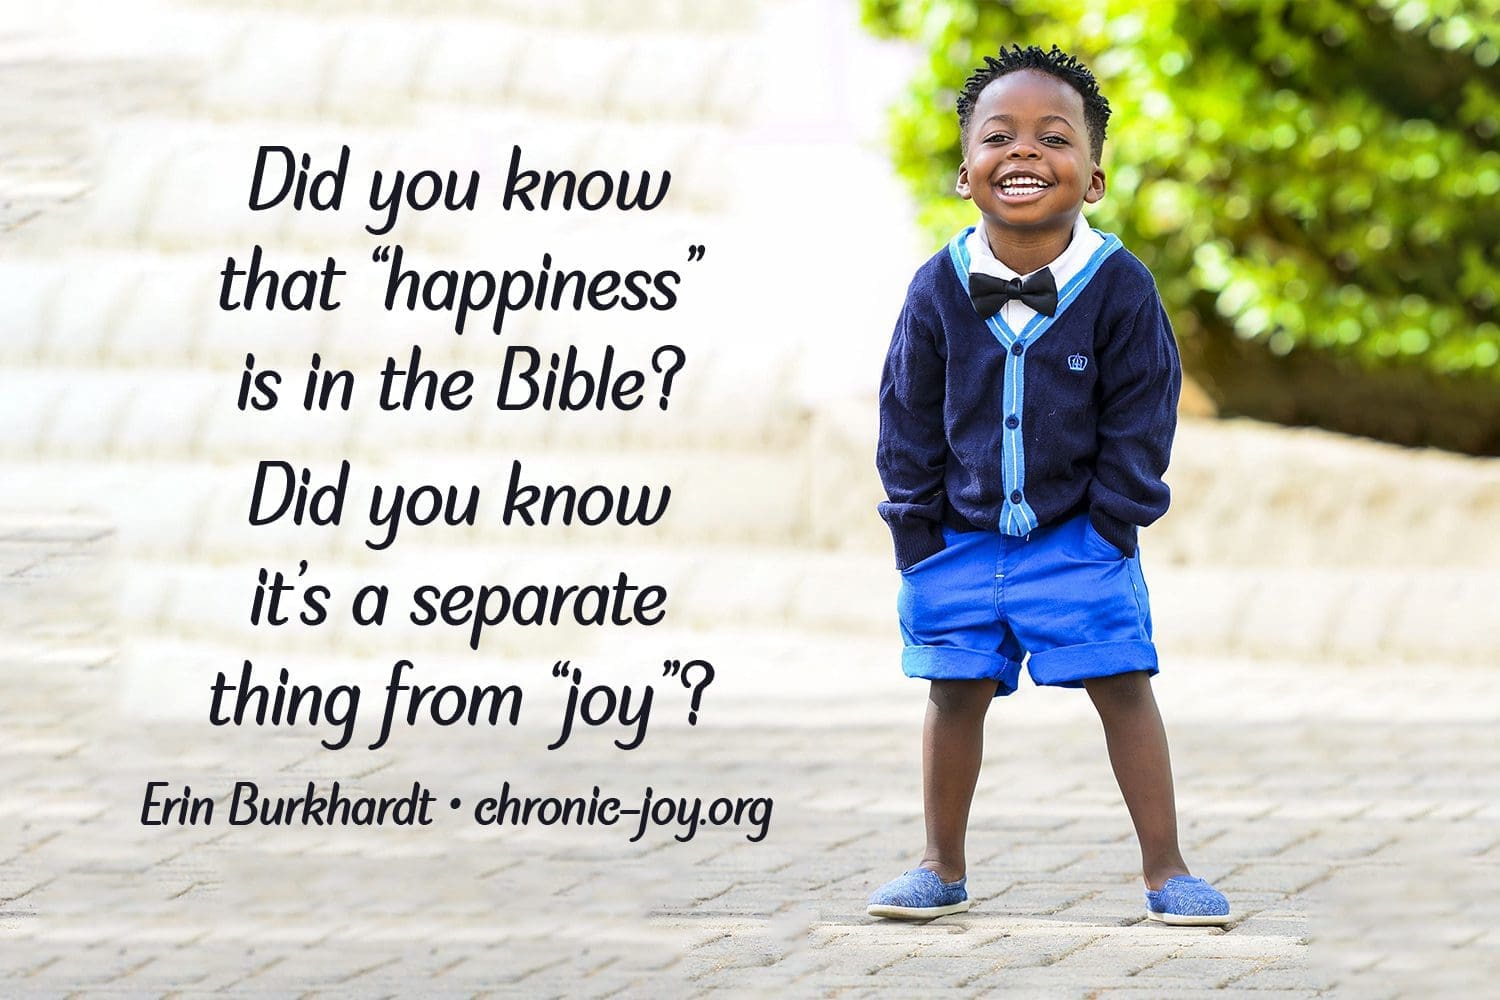 "Did you know that 'happiness' is in the Bible? Did you know it’s a separate thing from 'joy'?" Erin Burkhardt